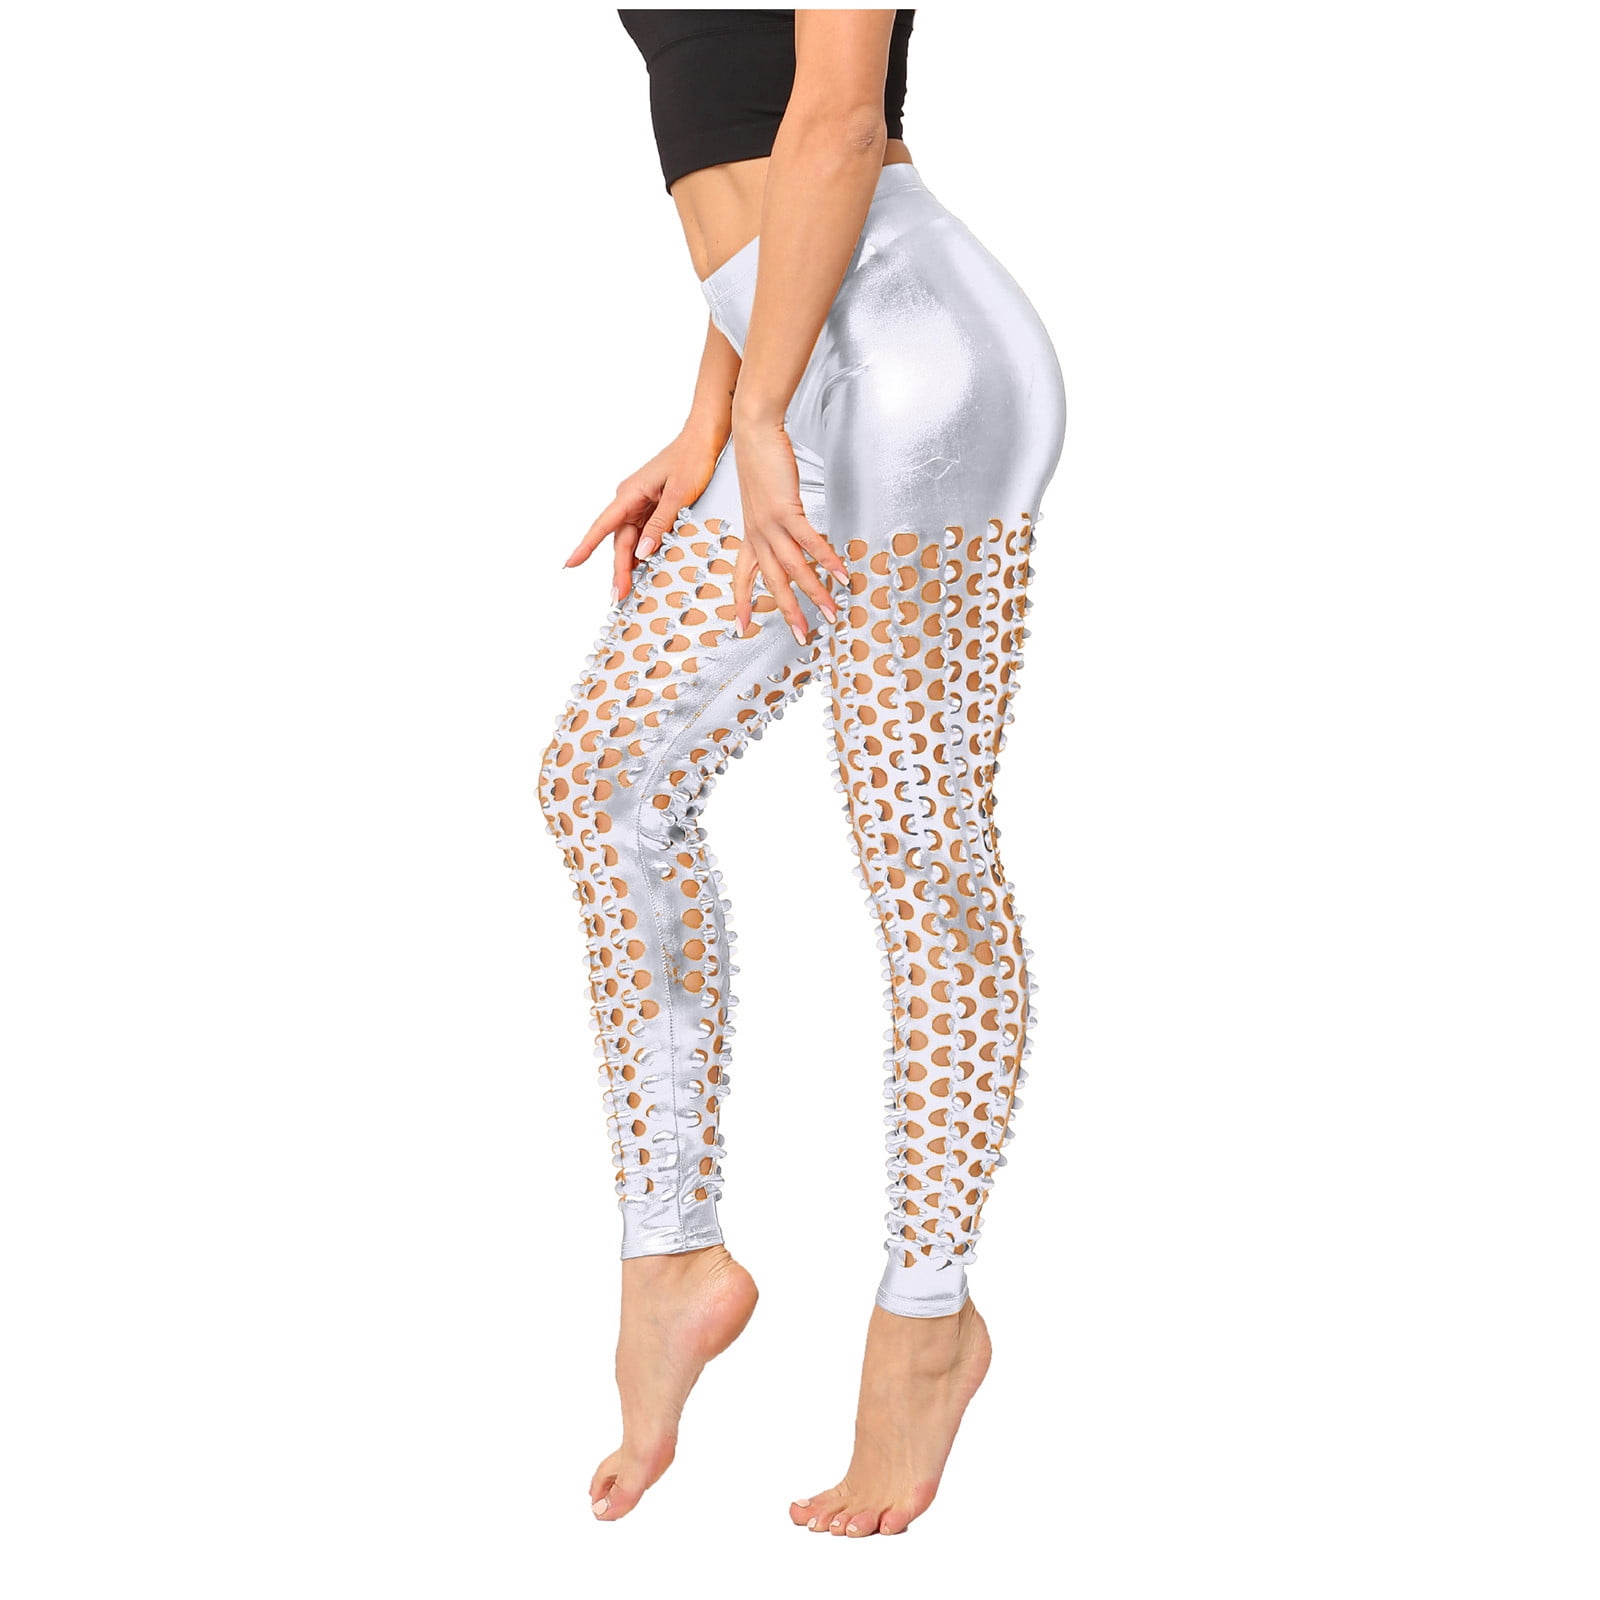 nsendm Female Pants Adult 80s Workout Clothes for Women Women Cow Baseball  Print Tights Leggings Control Yoga Sport Leggings Pack for Women(White, L)  